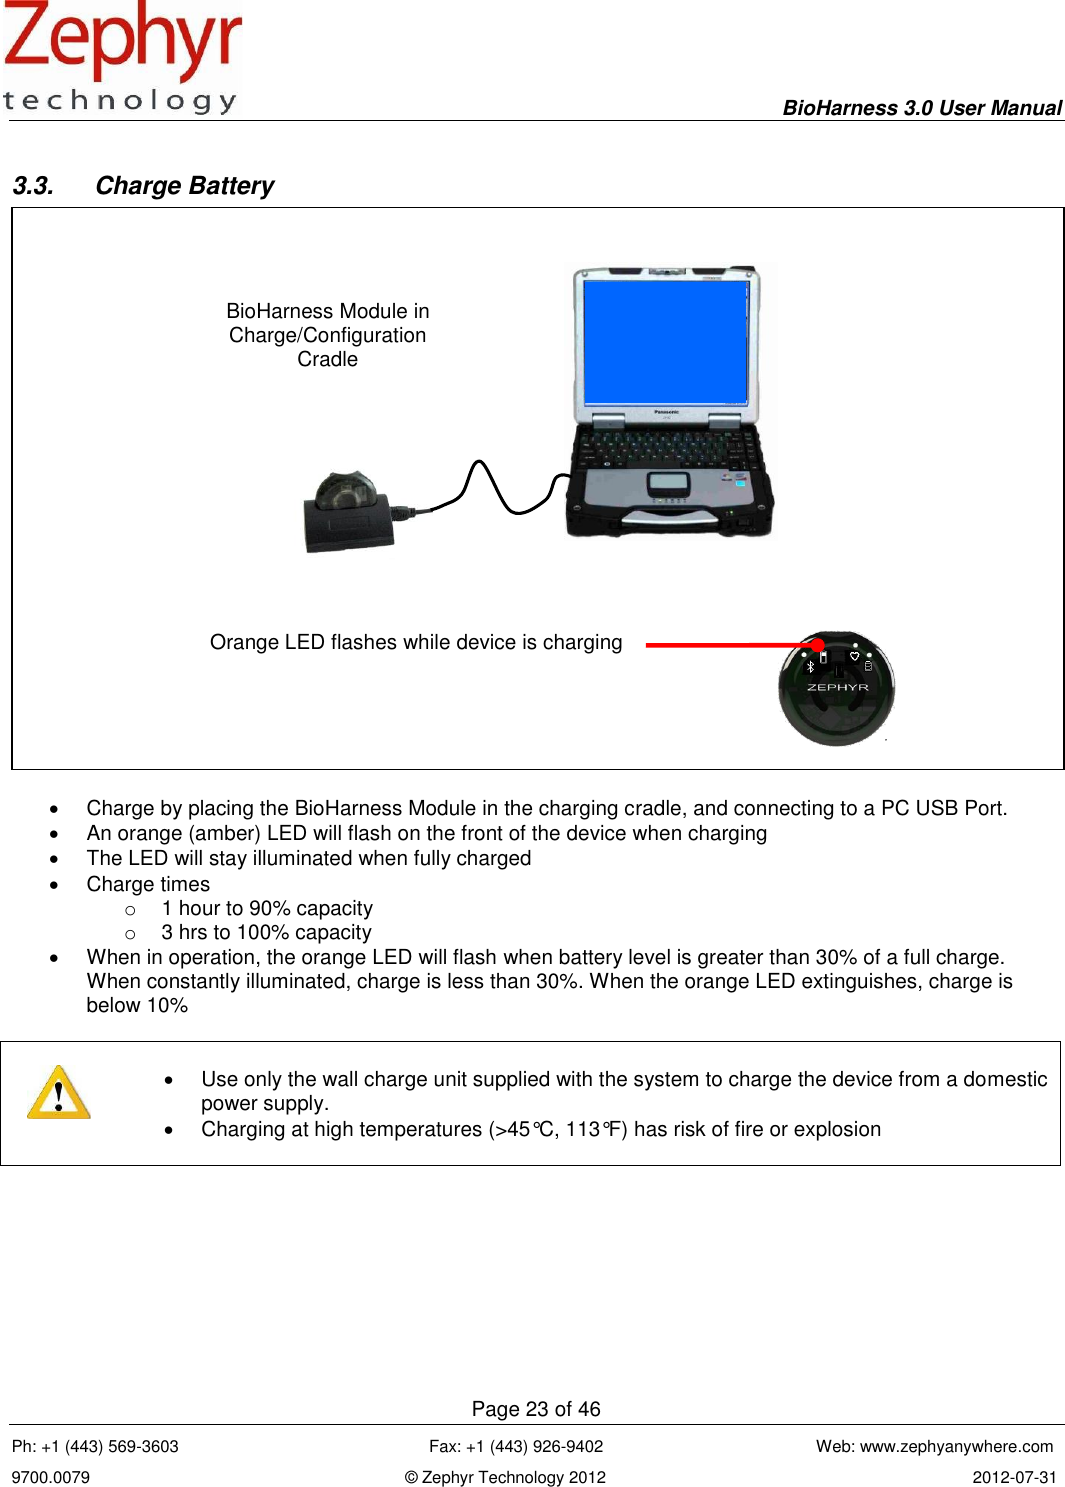     BioHarness 3.0 User Manual  Page 23 of 46 Ph: +1 (443) 569-3603                                                      Fax: +1 (443) 926-9402                                              Web: www.zephyanywhere.com 9700.0079                                                                    © Zephyr Technology 2012                                                                               2012-07-31                                                                                                                                      3.3.  Charge Battery     Charge by placing the BioHarness Module in the charging cradle, and connecting to a PC USB Port.   An orange (amber) LED will flash on the front of the device when charging   The LED will stay illuminated when fully charged   Charge times o  1 hour to 90% capacity o  3 hrs to 100% capacity   When in operation, the orange LED will flash when battery level is greater than 30% of a full charge. When constantly illuminated, charge is less than 30%. When the orange LED extinguishes, charge is below 10%        Use only the wall charge unit supplied with the system to charge the device from a domestic power supply.   Charging at high temperatures (&gt;45°C, 113°F) has risk of fire or explosion   BioHarness Module in Charge/Configuration Cradle Orange LED flashes while device is charging  